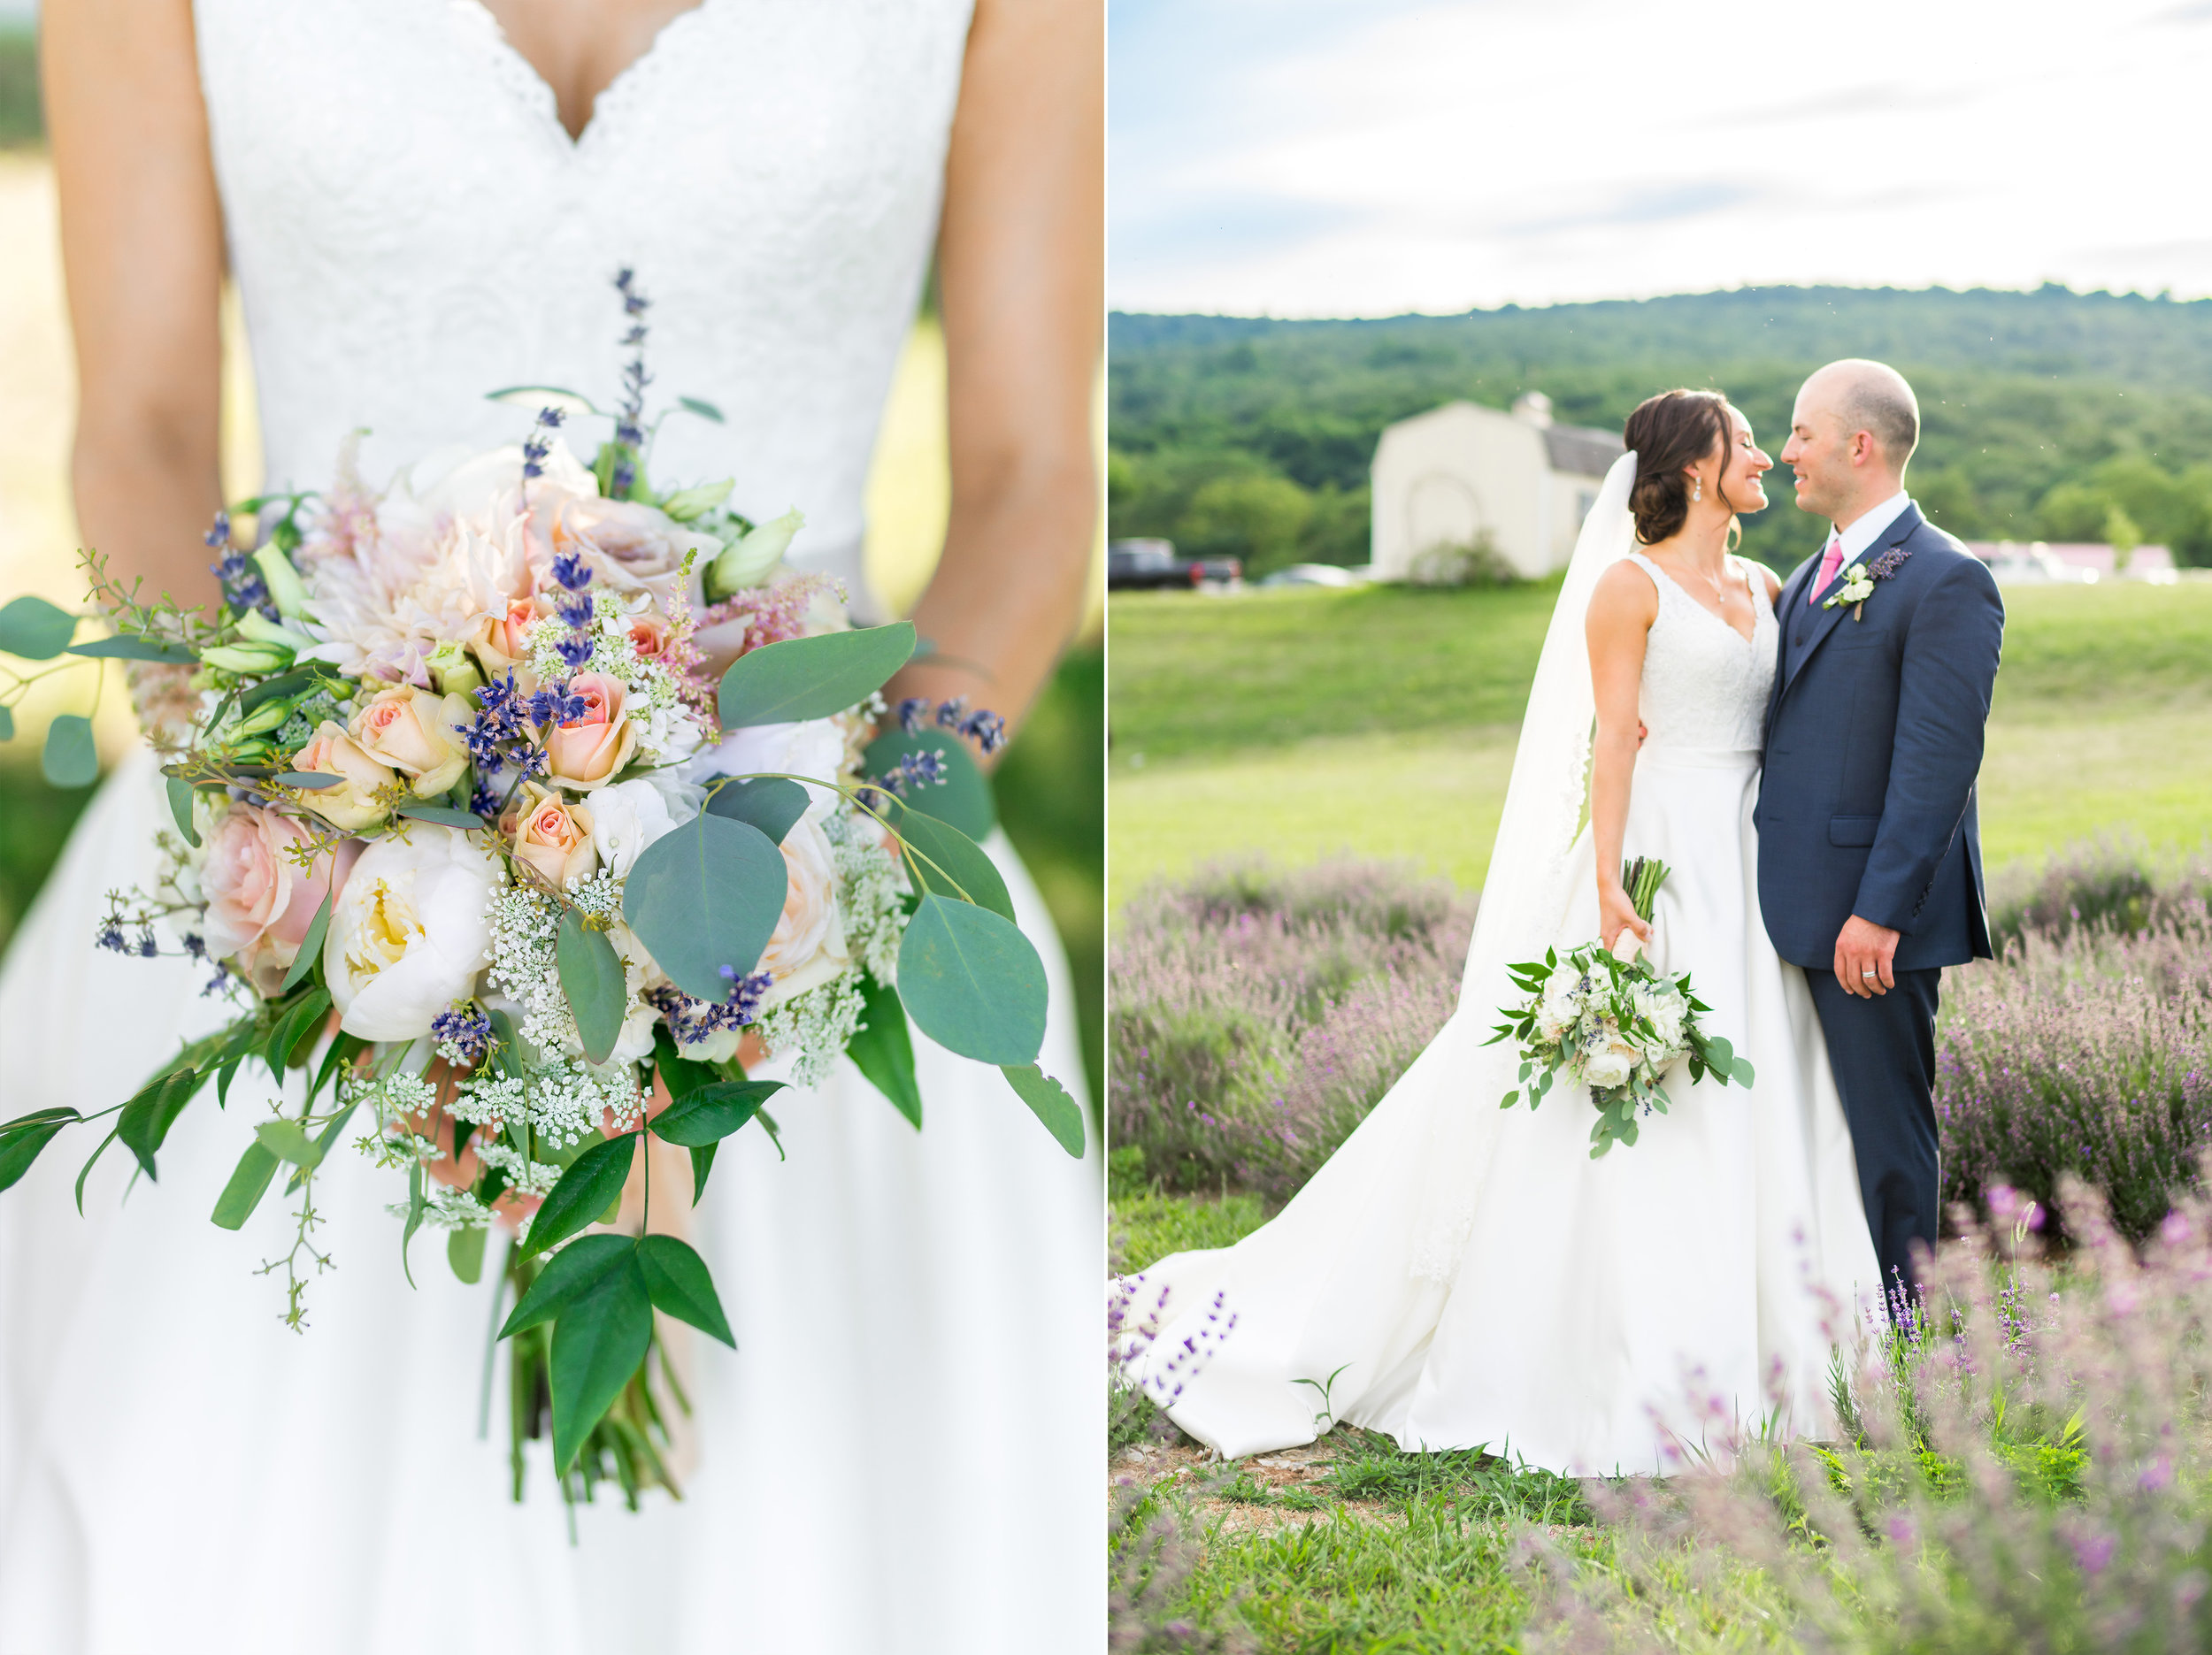 Wedding photos in lavender fields Maryland and Virginia